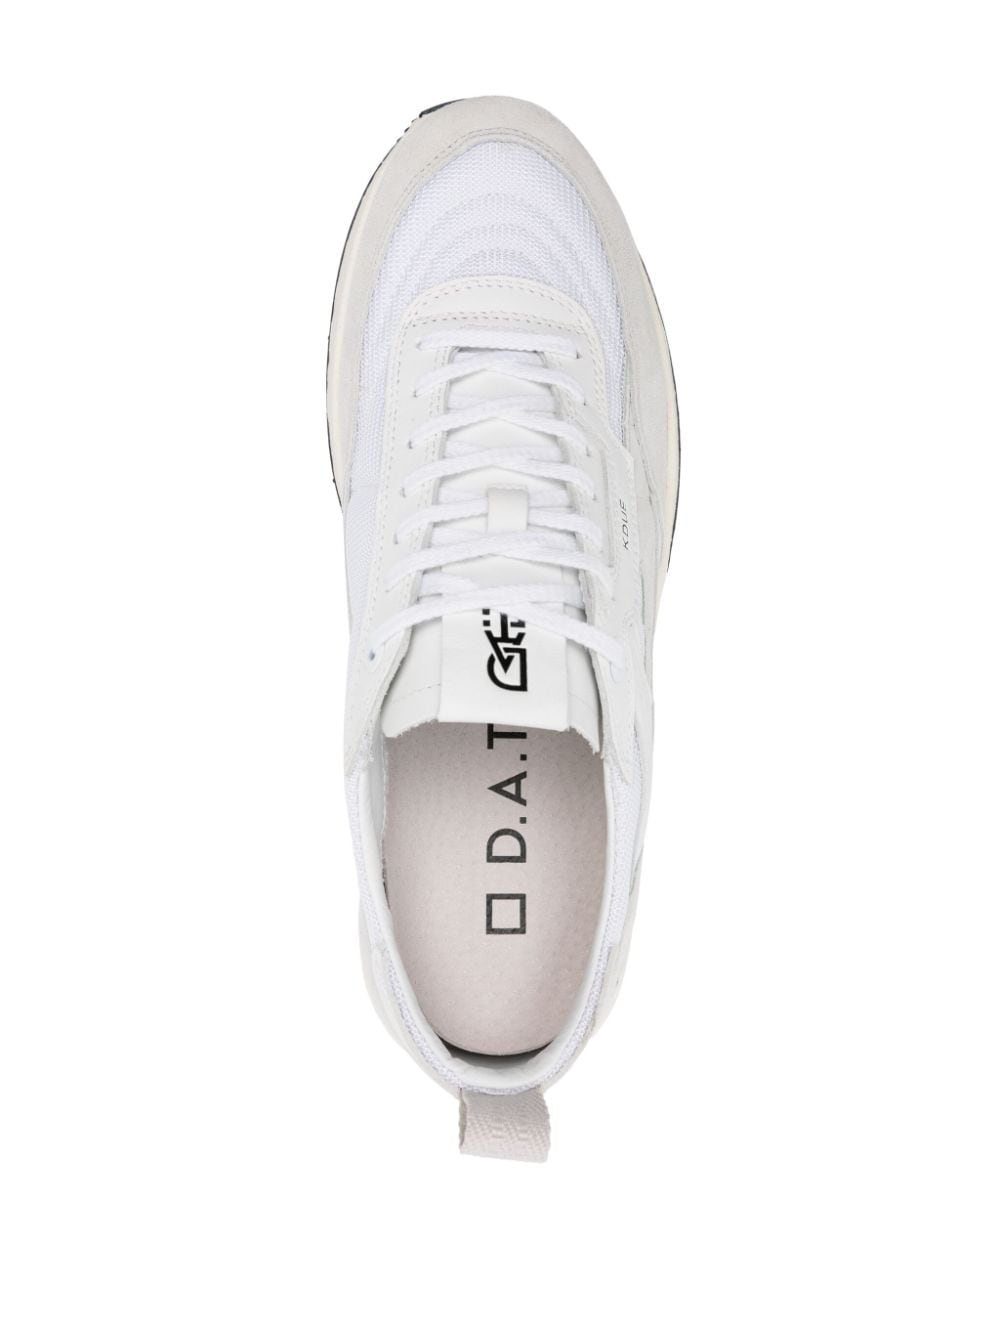 Shop Date Kdue Panelled Sneakers In White